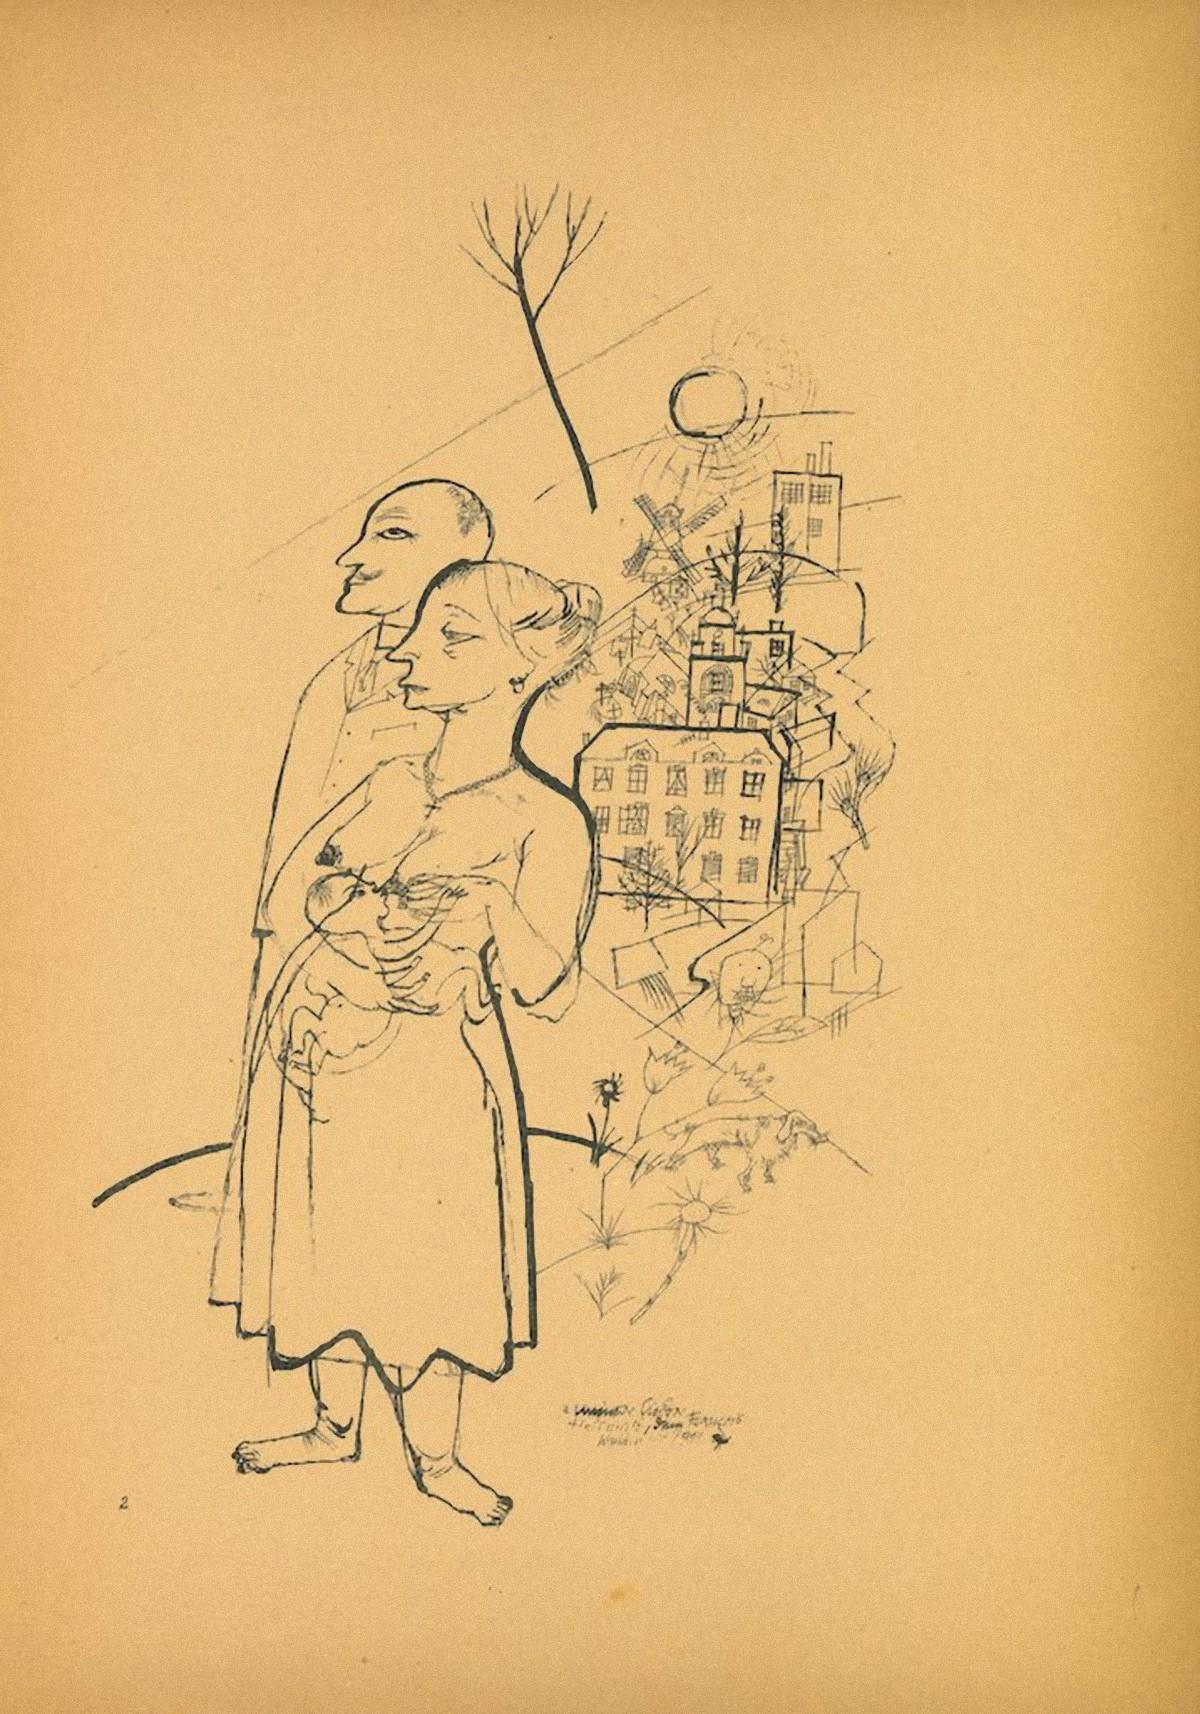 Family - Offset and Lithograph by George Grosz - 1923